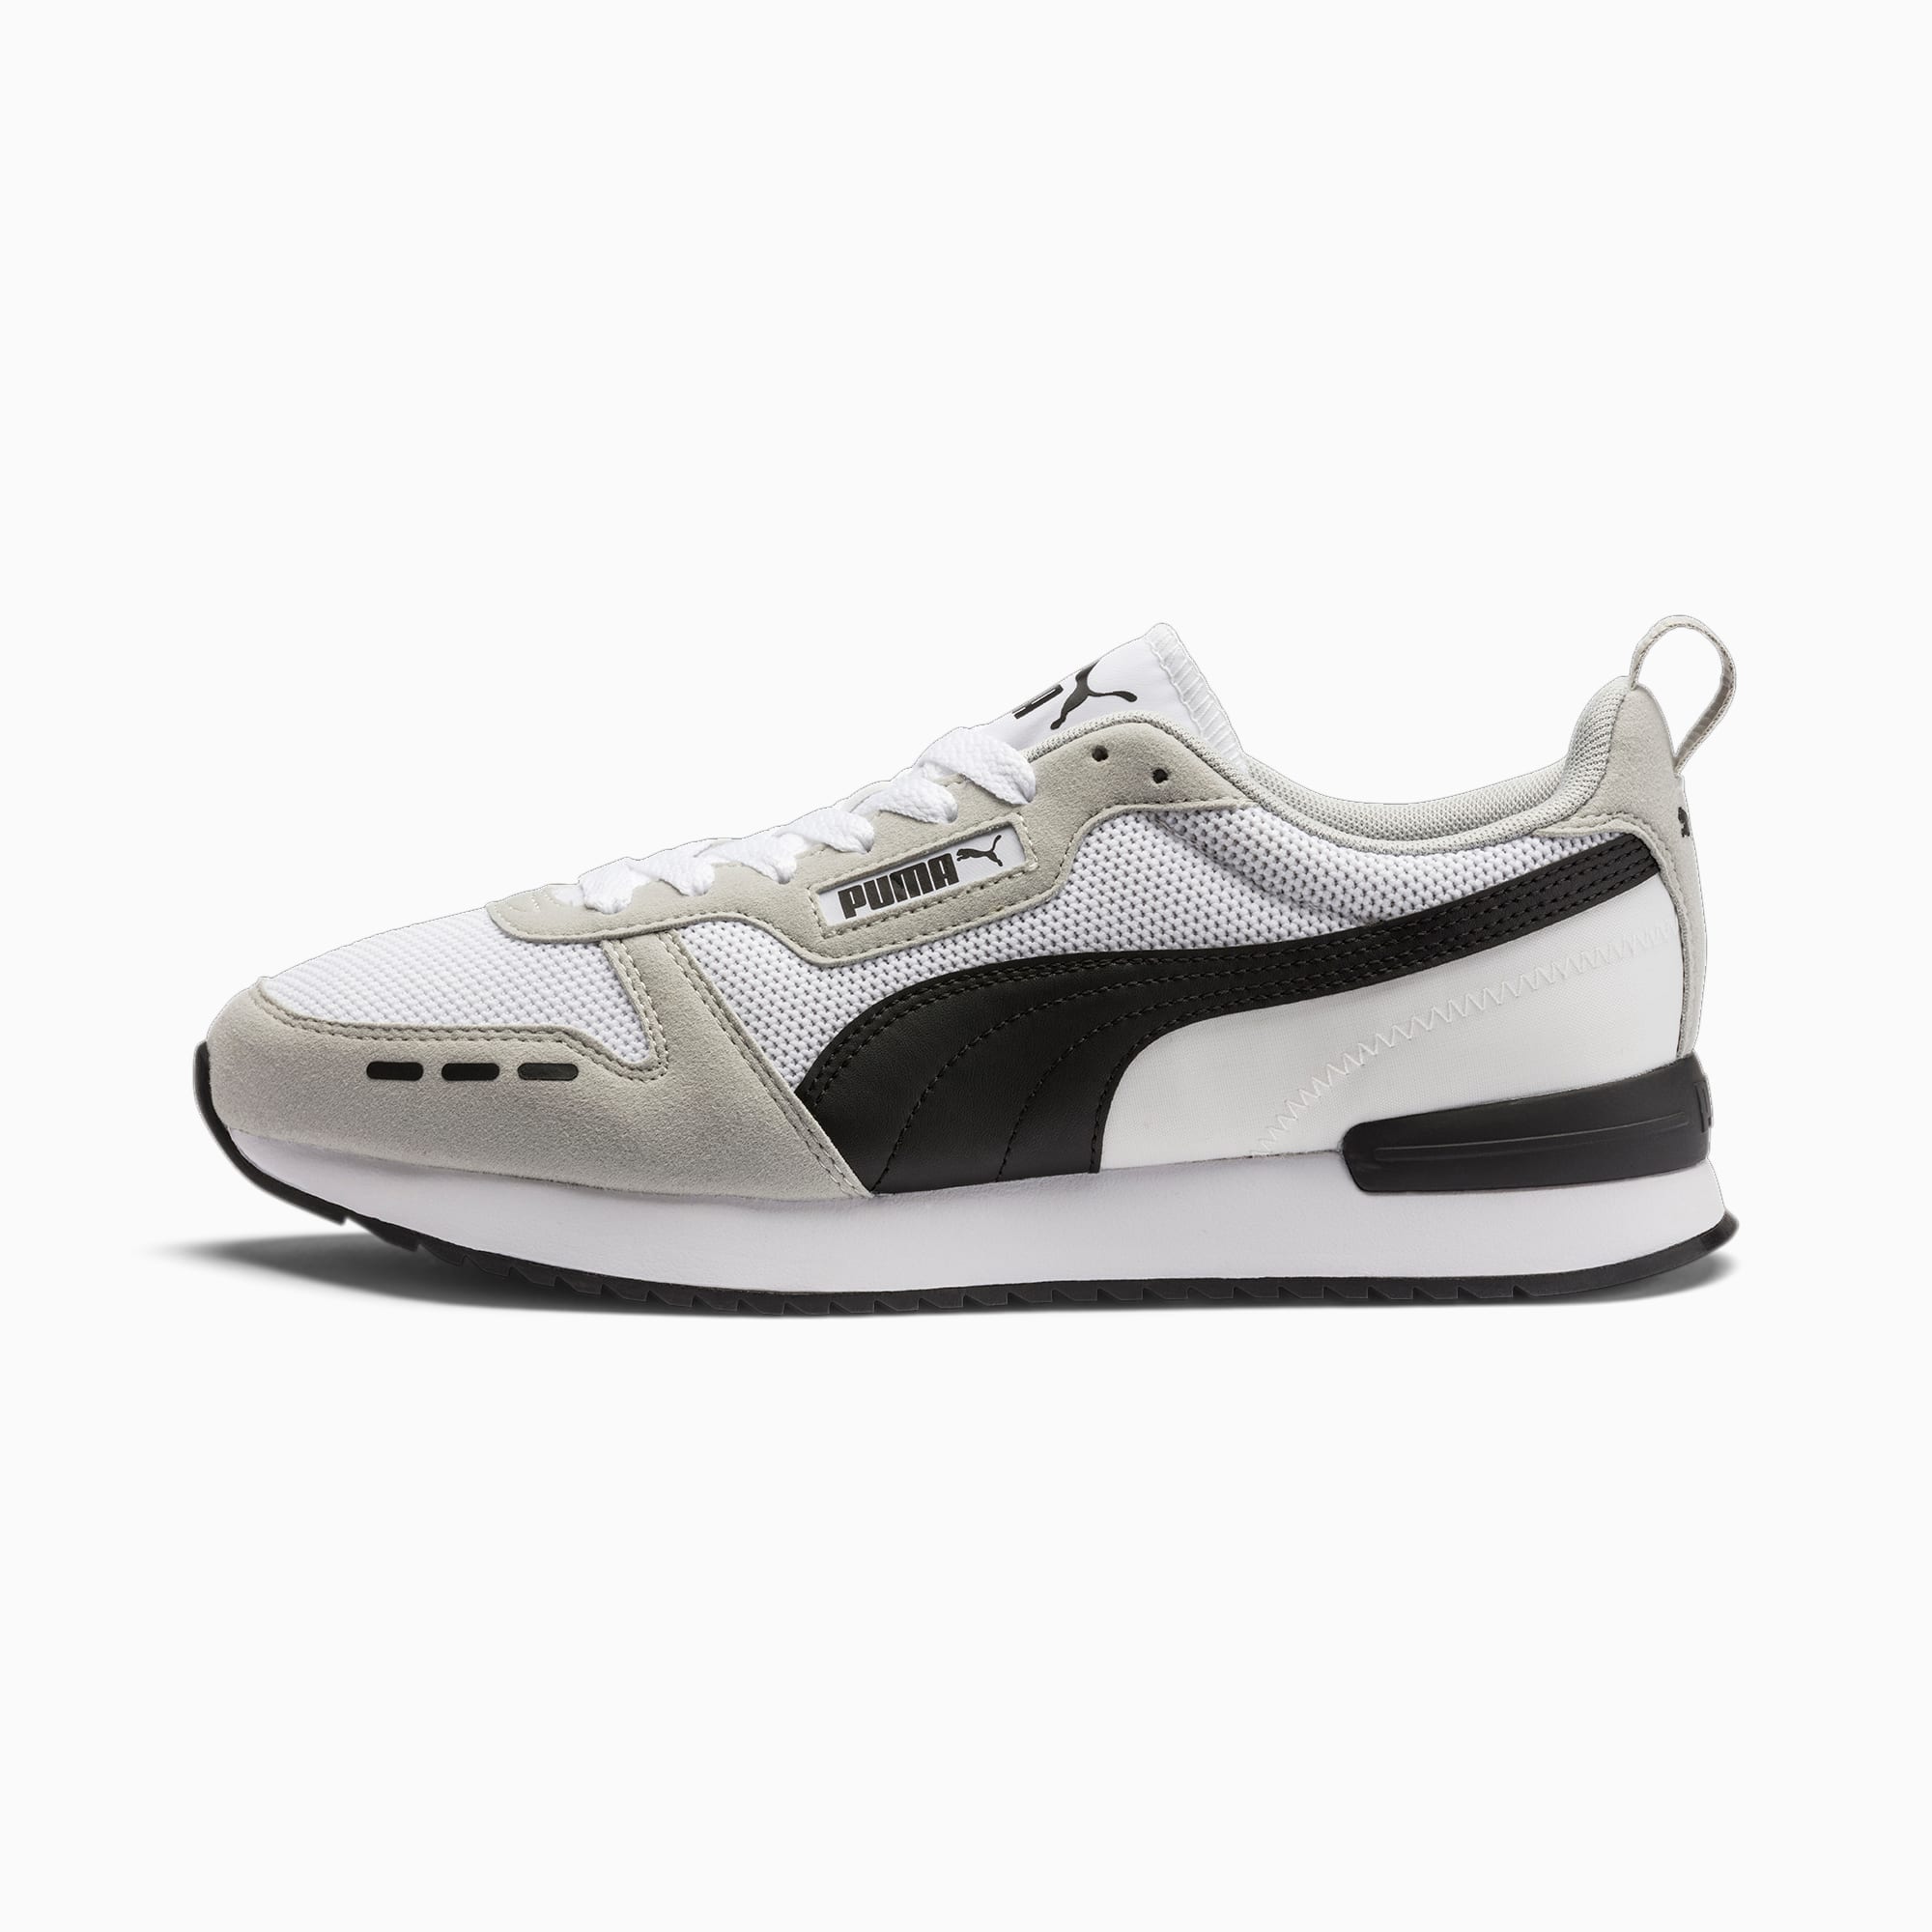 Women's PUMA R78 Runner Trainers, White/Grey Violet/Black, Size 35,5, Shoes